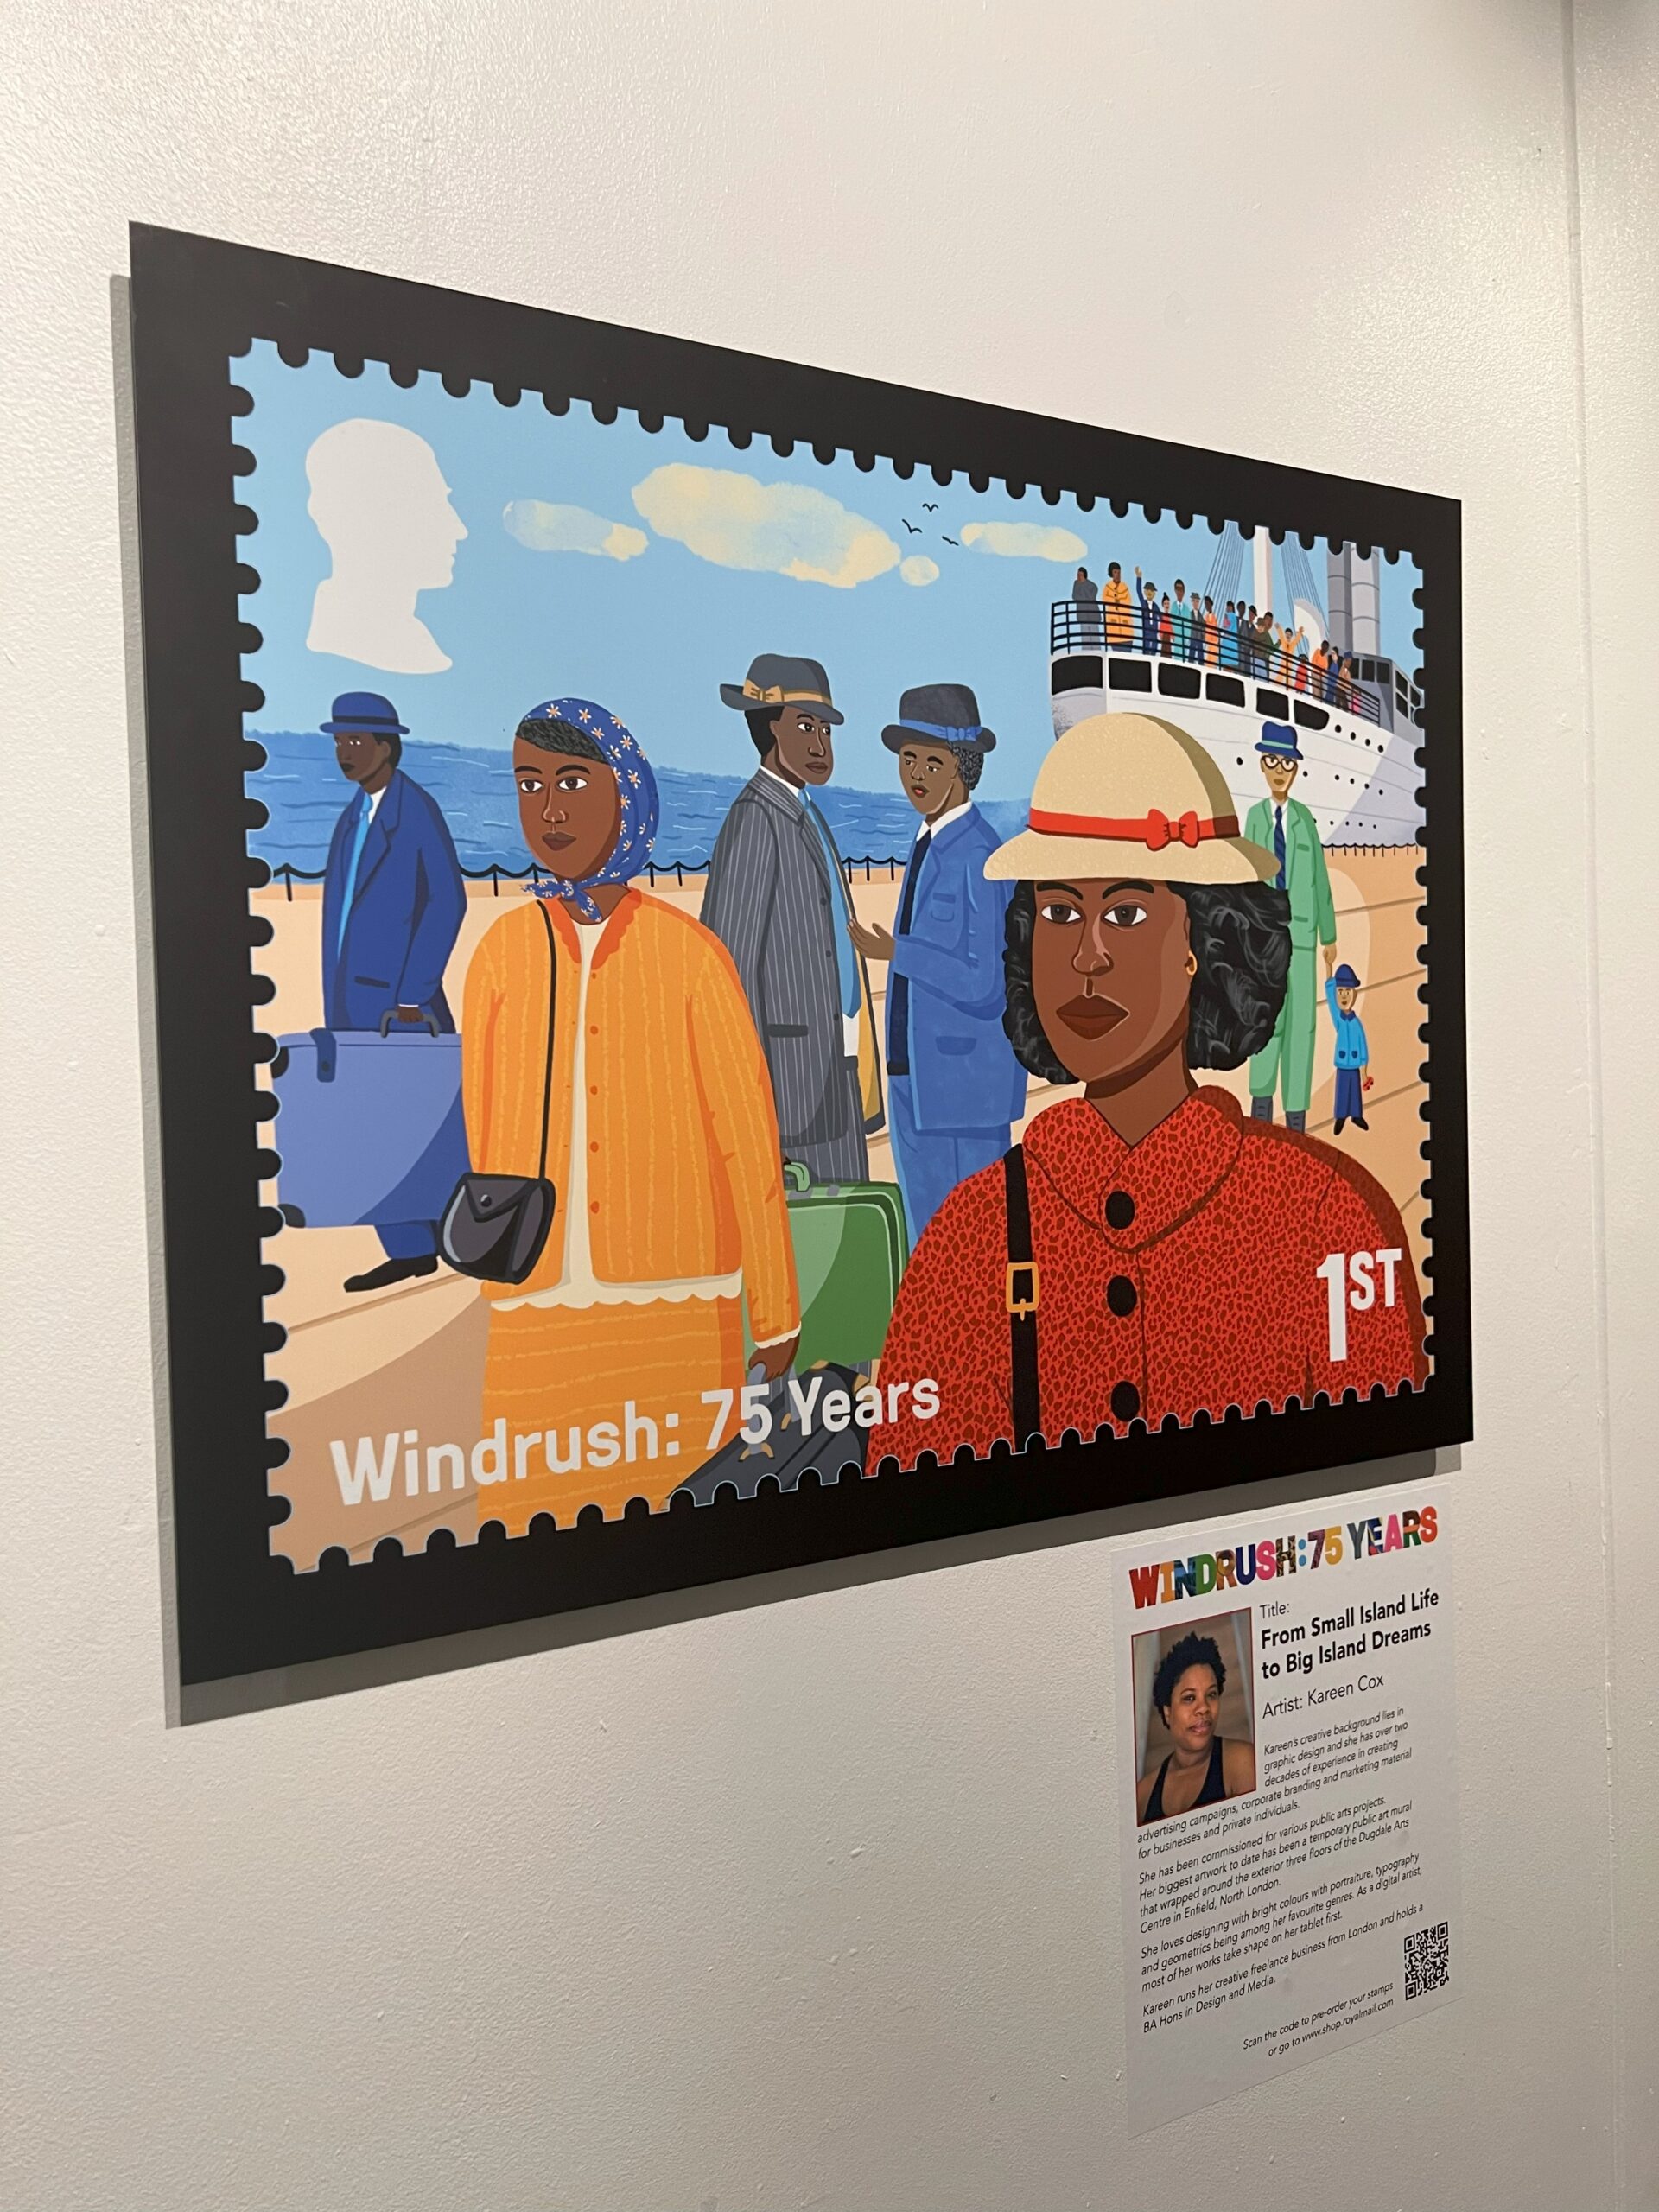 Design that shows Windrush migrants arriving in the UK aboard a ship: 'From Small Island Life to Big Island Dreams'